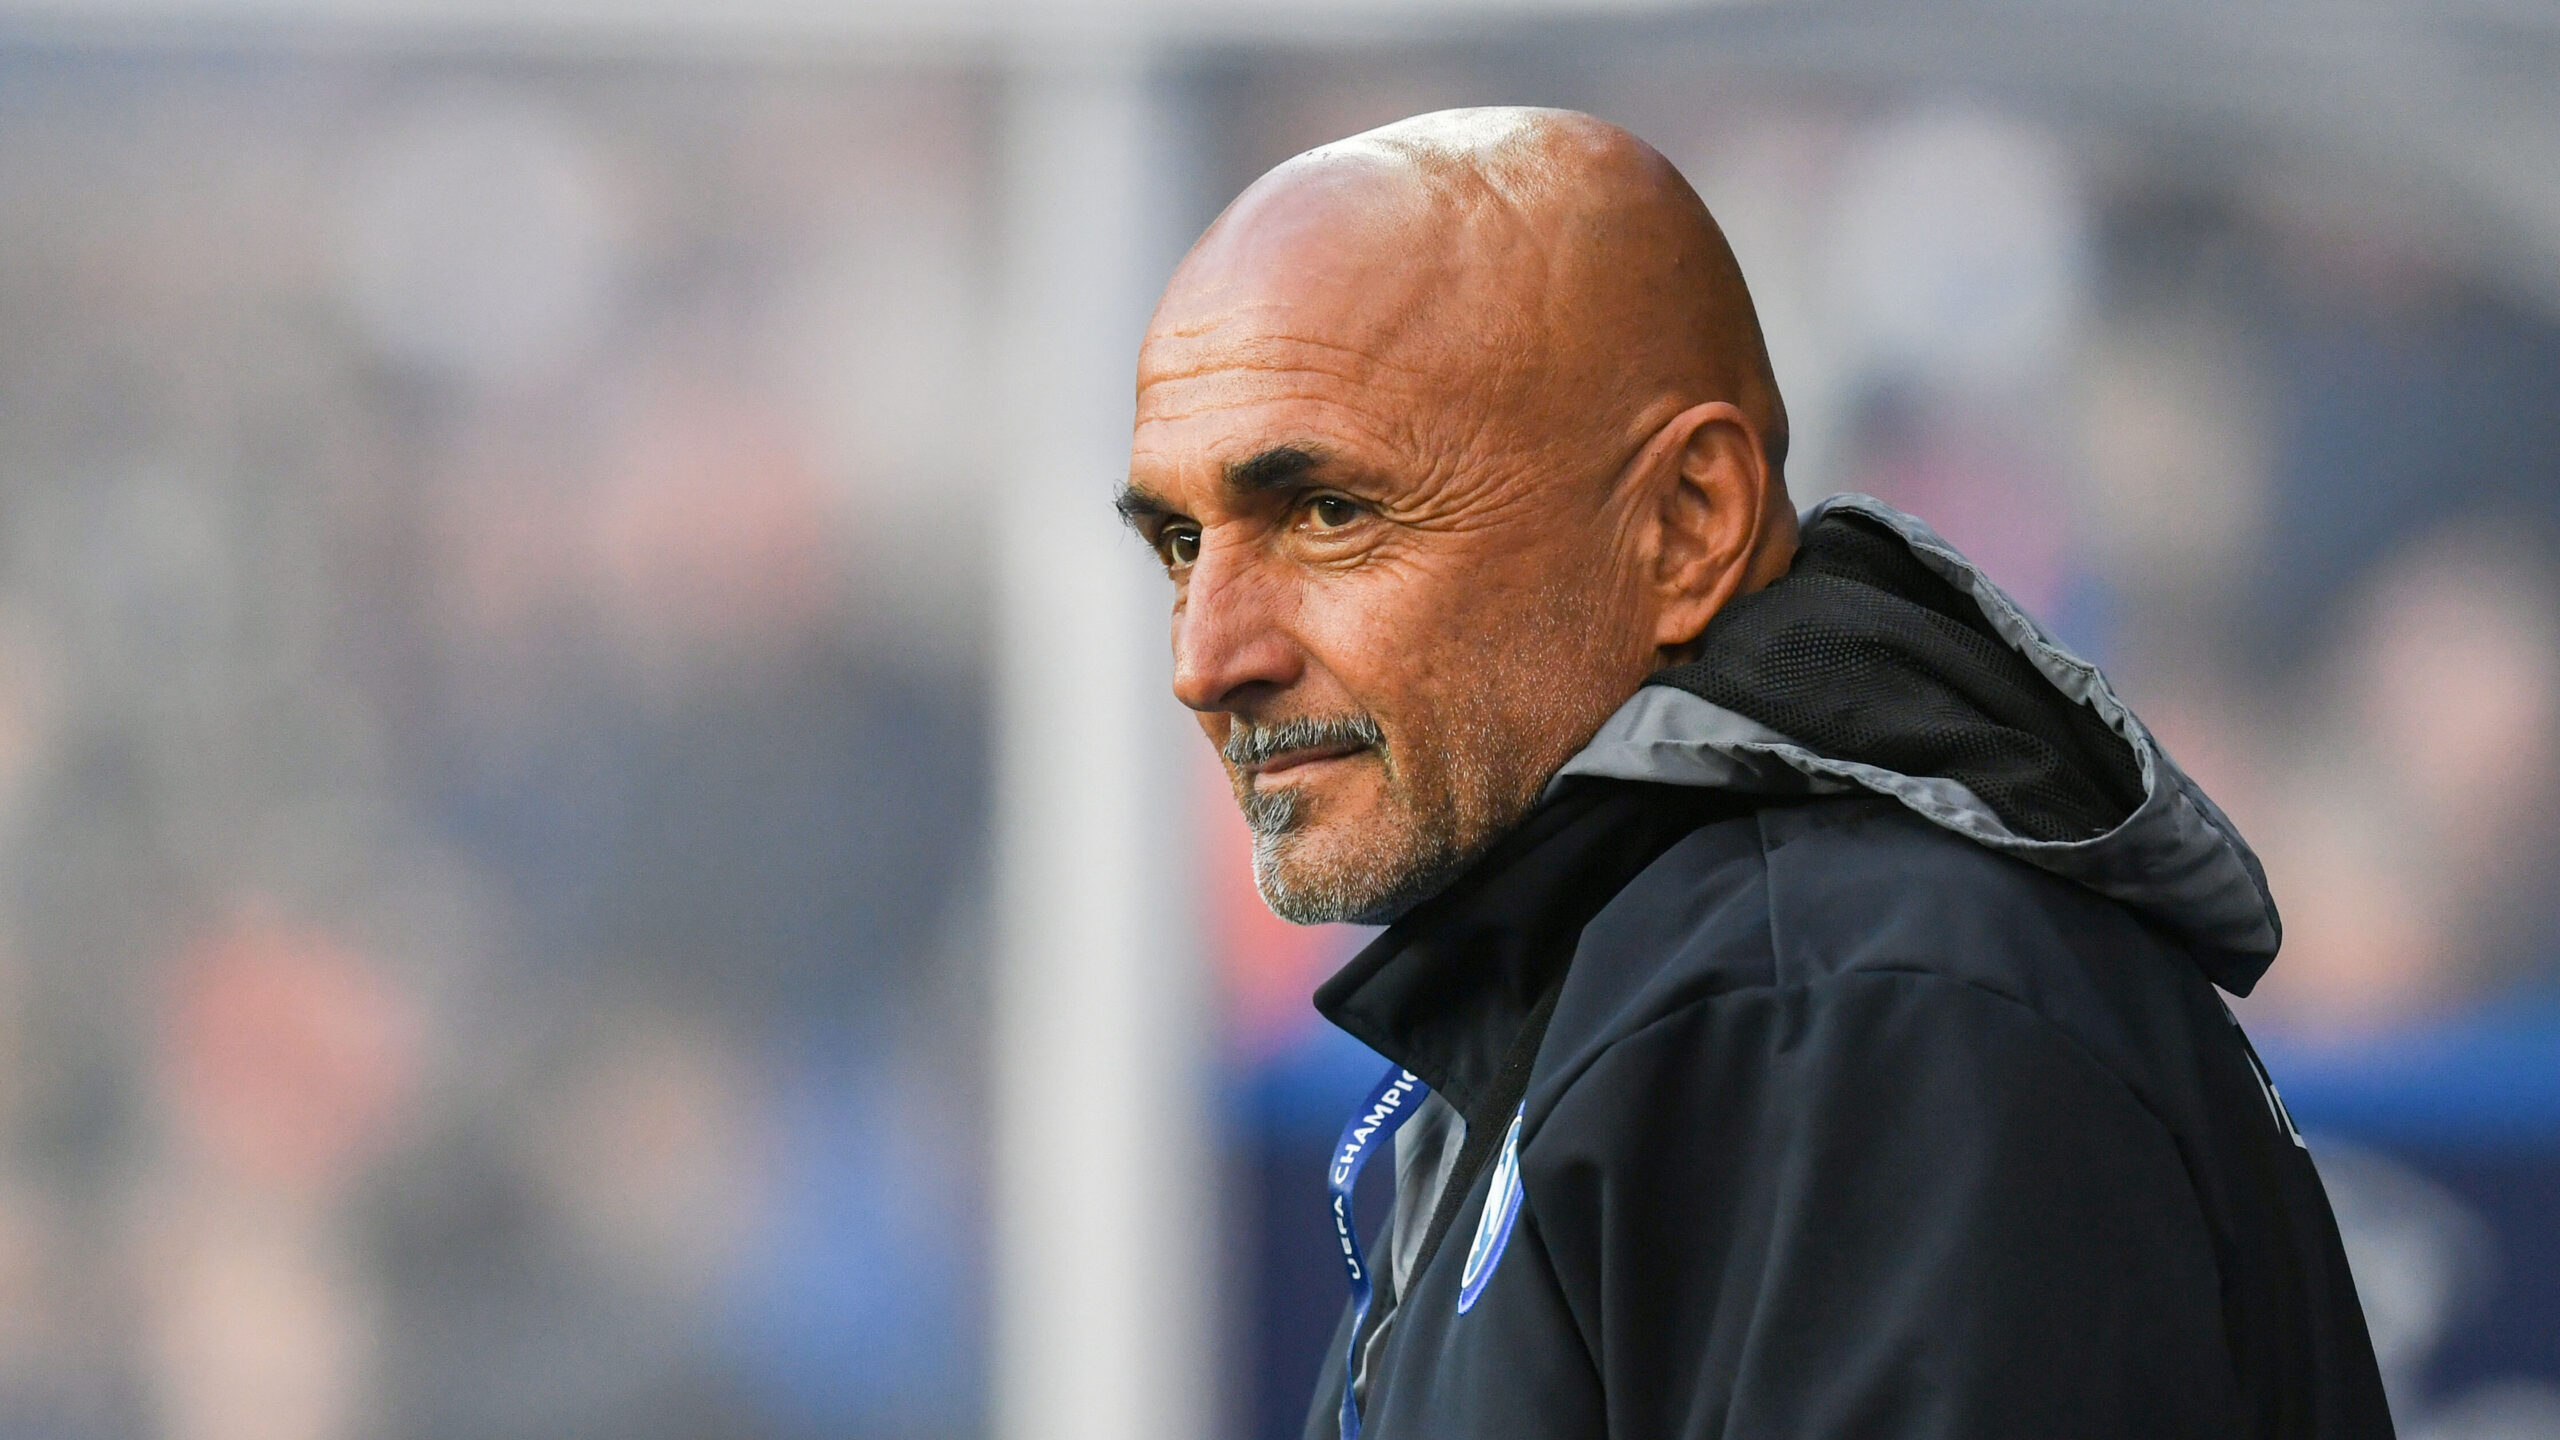 Luciano Spalletti rallied the Napoli fans while interrupting the presentation of goalie Pierluigi Gollini. "We do everything for the club and the city."